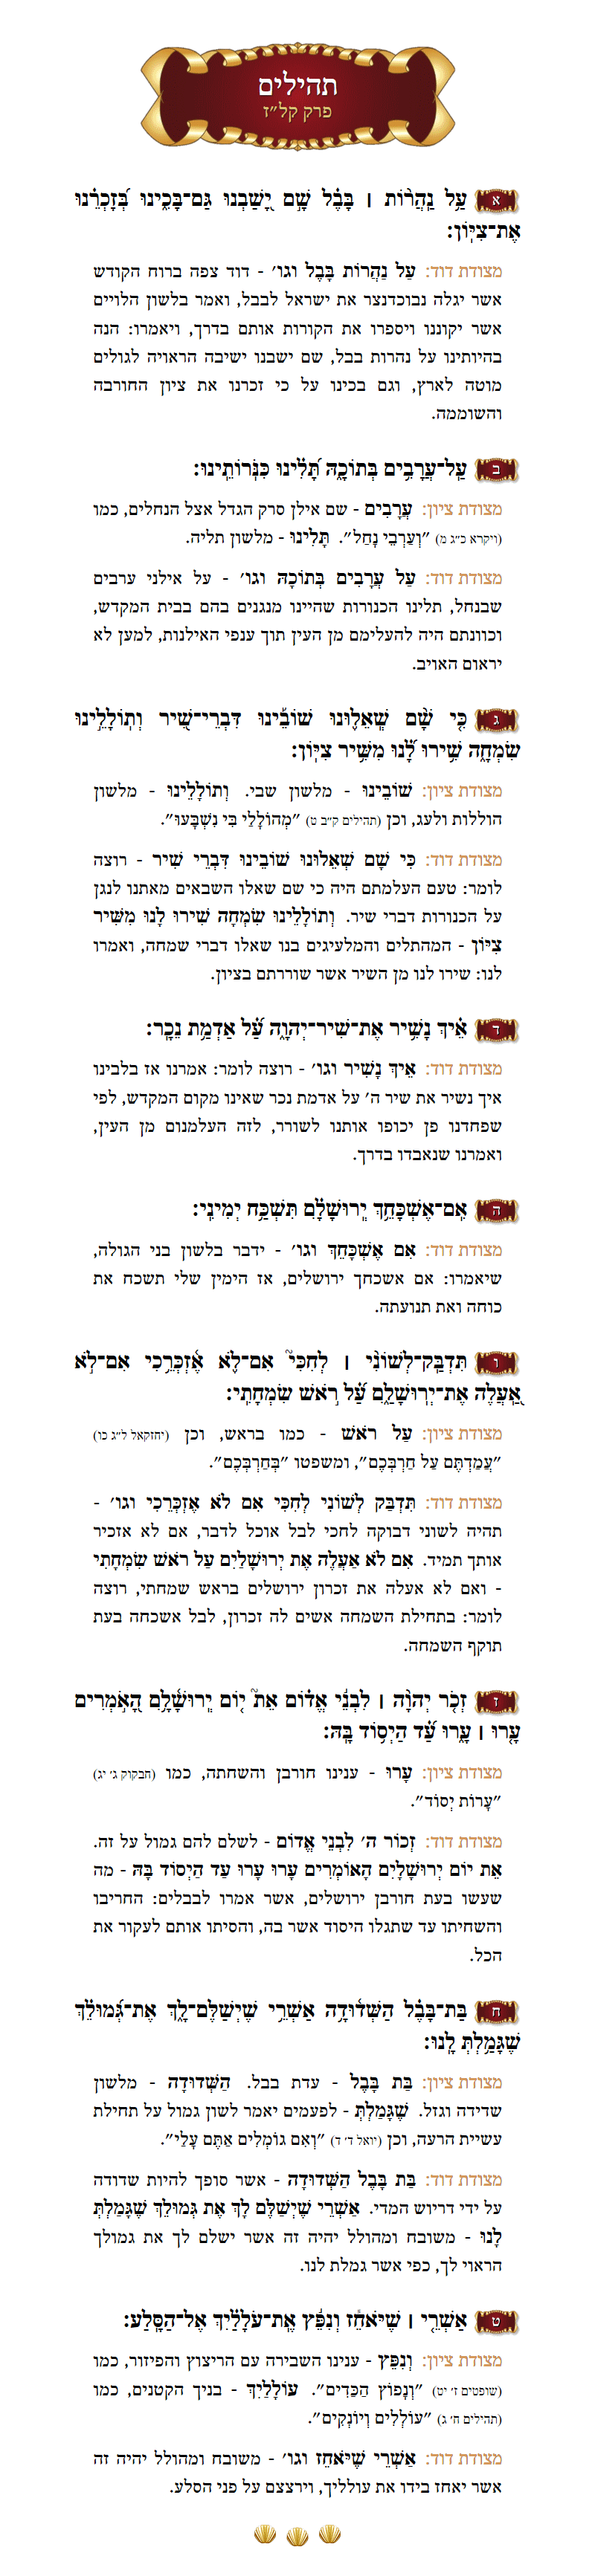 Sefer Tehillim Chapter 137 with commentary